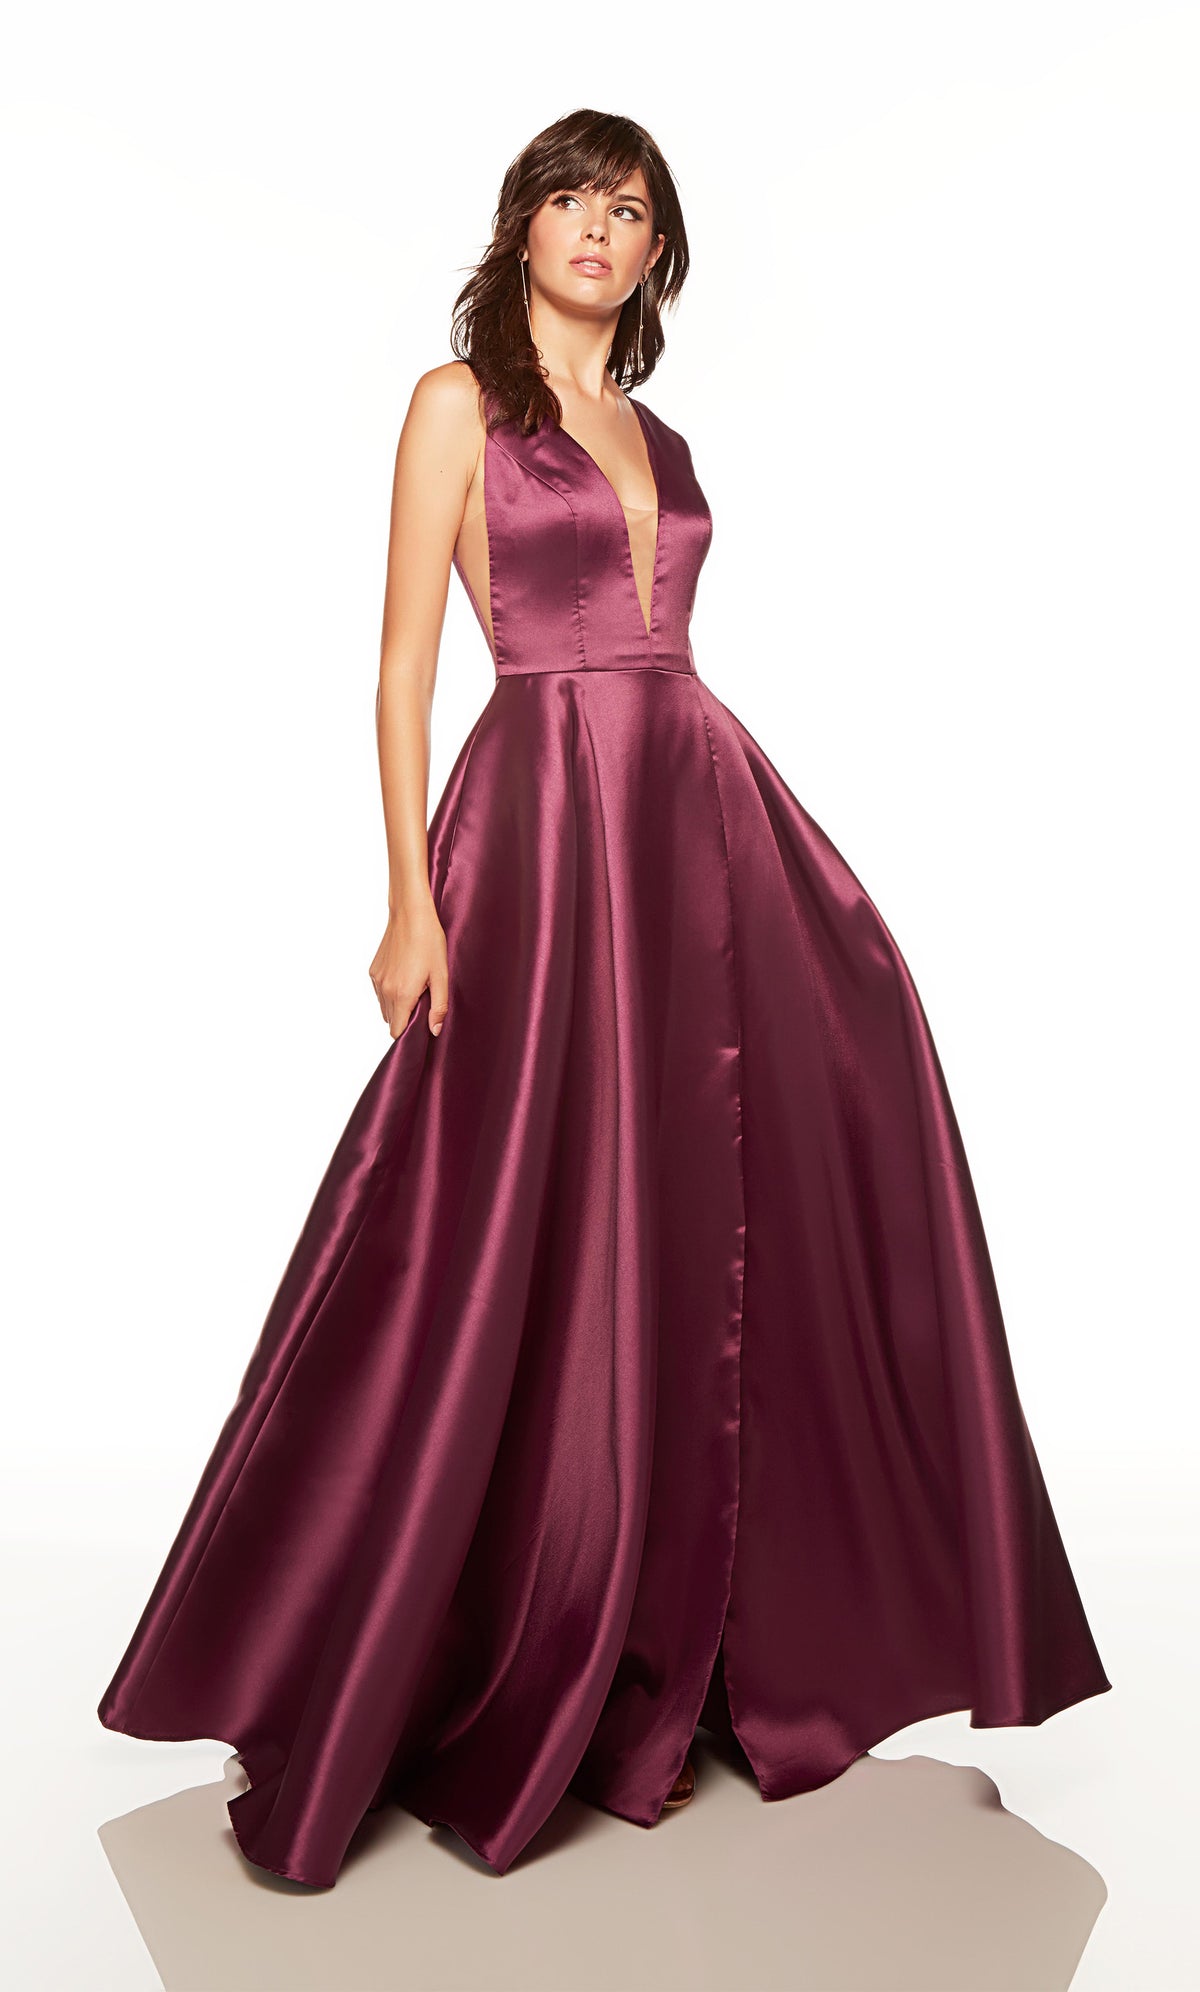 Elegant ballgown with a plunging neckline and side slit in black plum color.